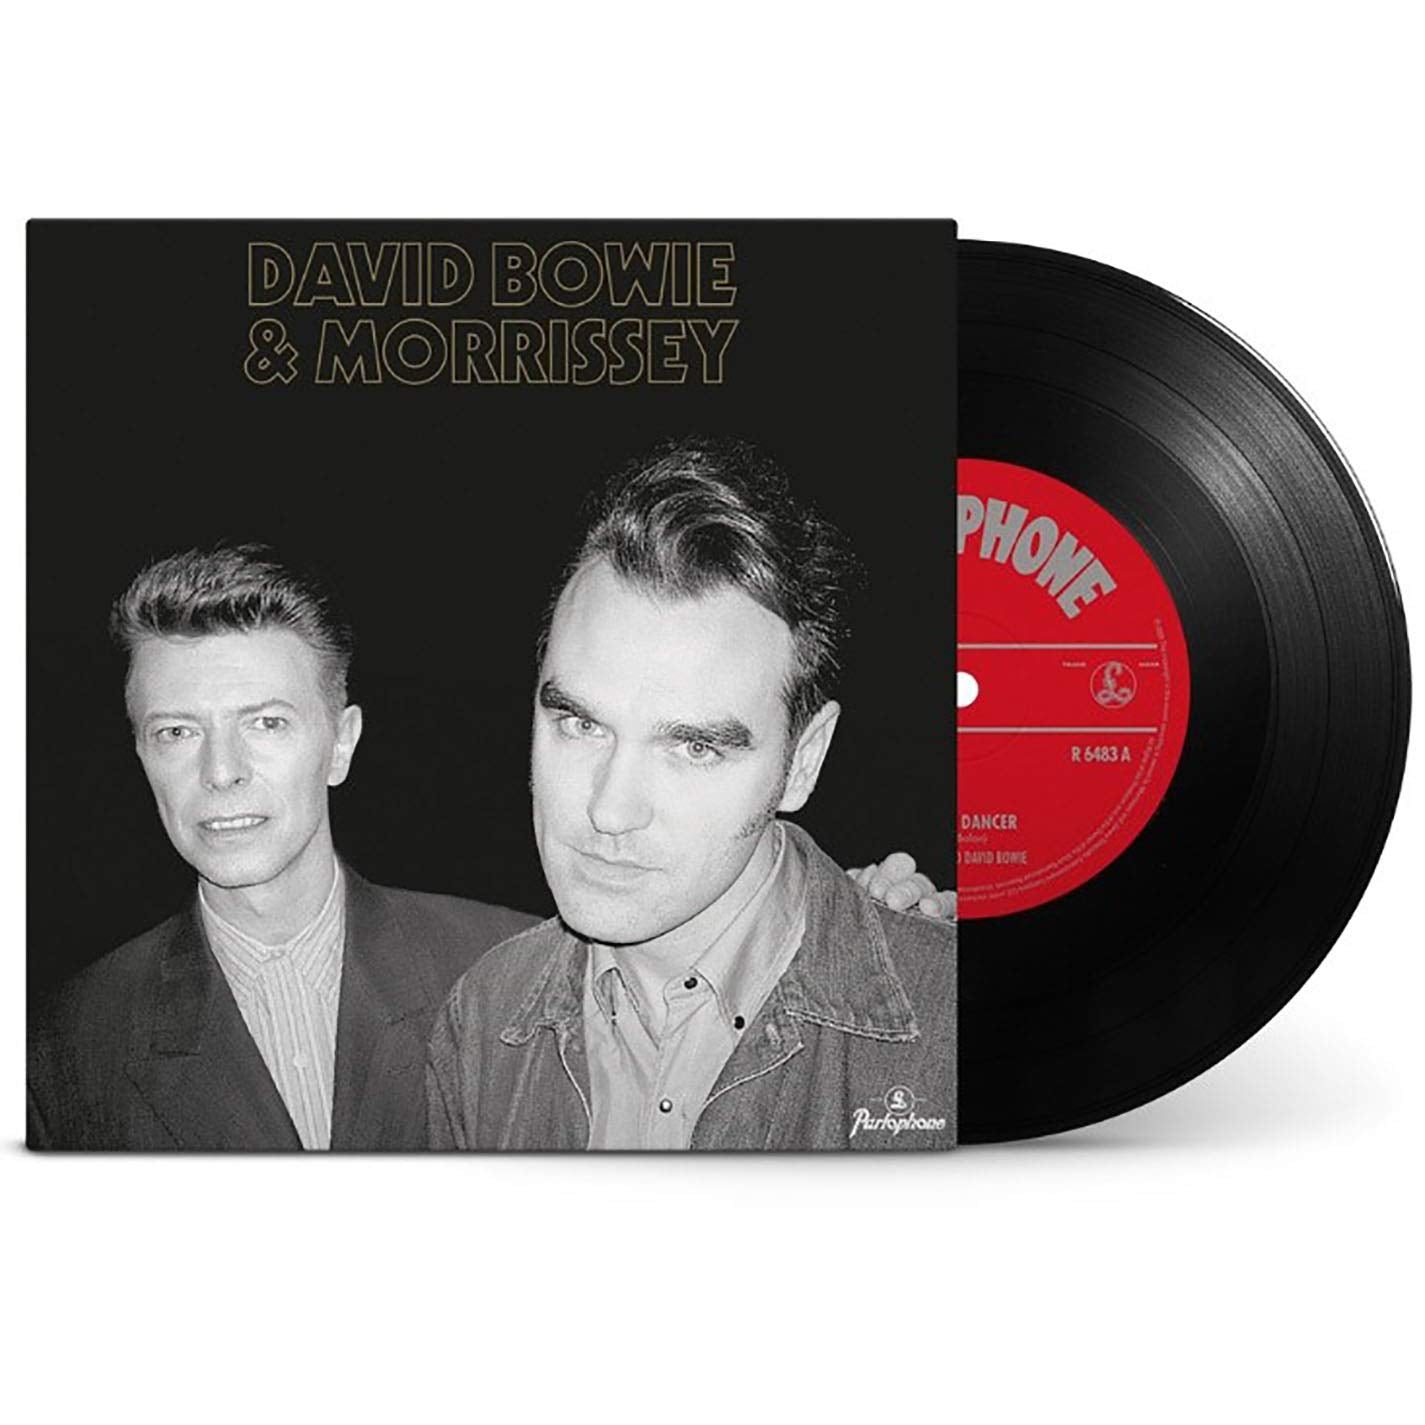 David Bowie and Morrissey - Cosmic Dancer / That's Entertainment [7"]